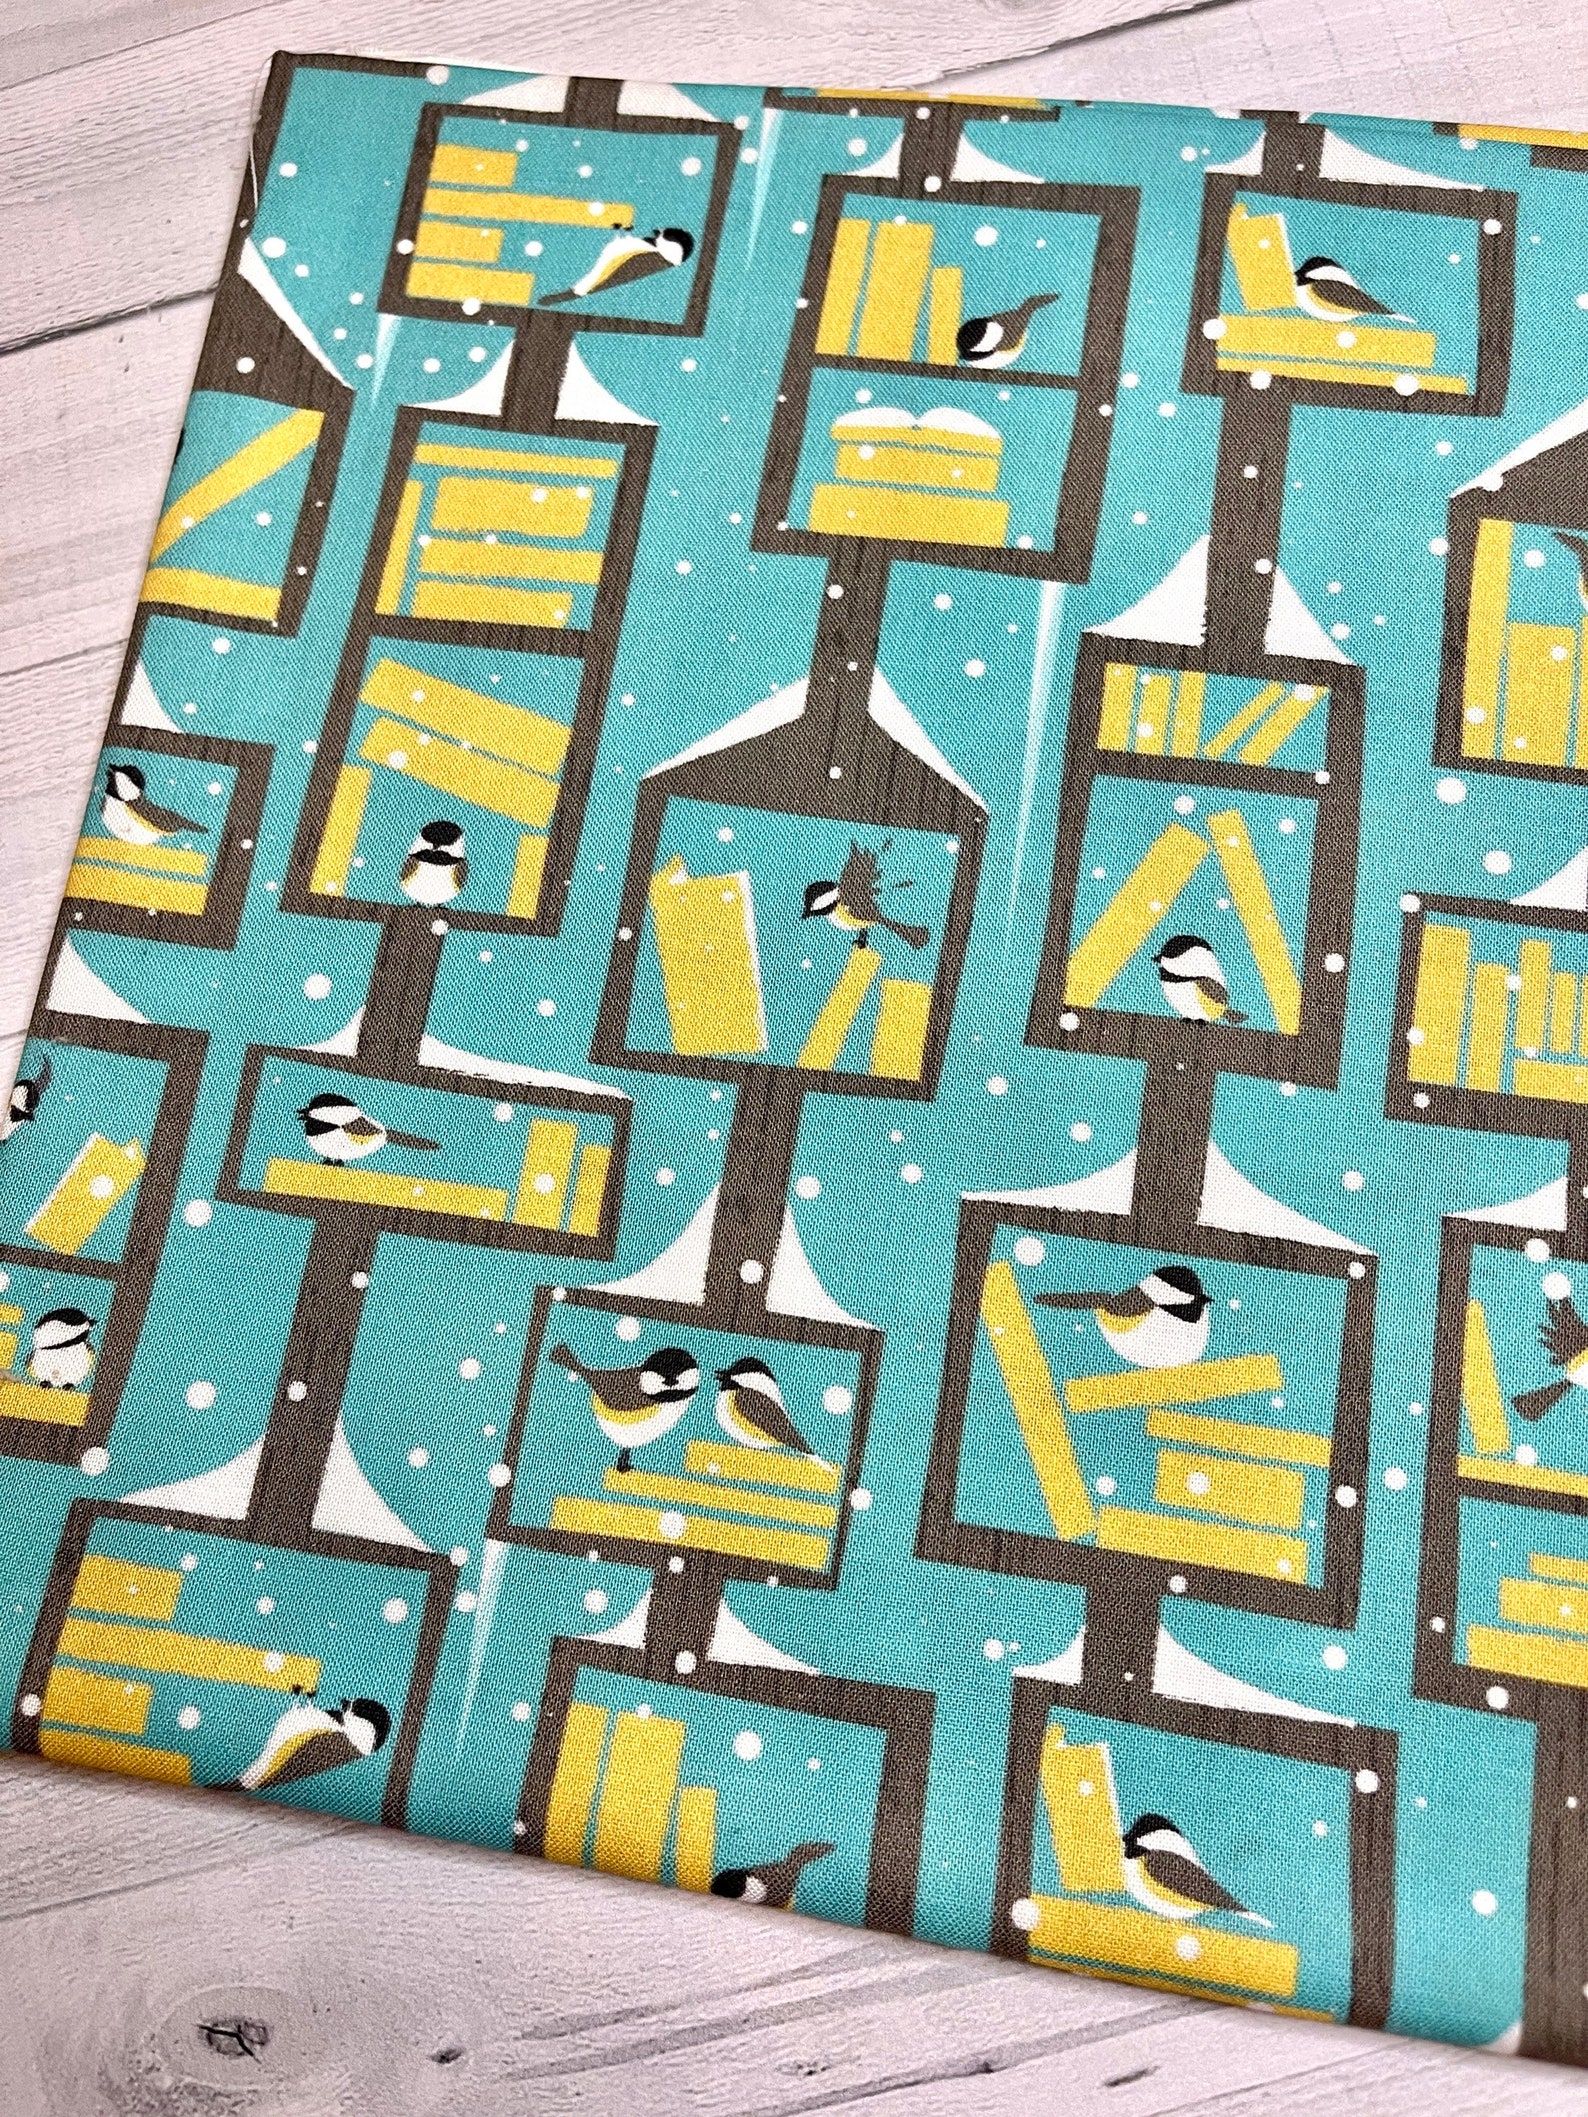 A book sleeve made of blue fabric depicting LFL's in a wintry scene.